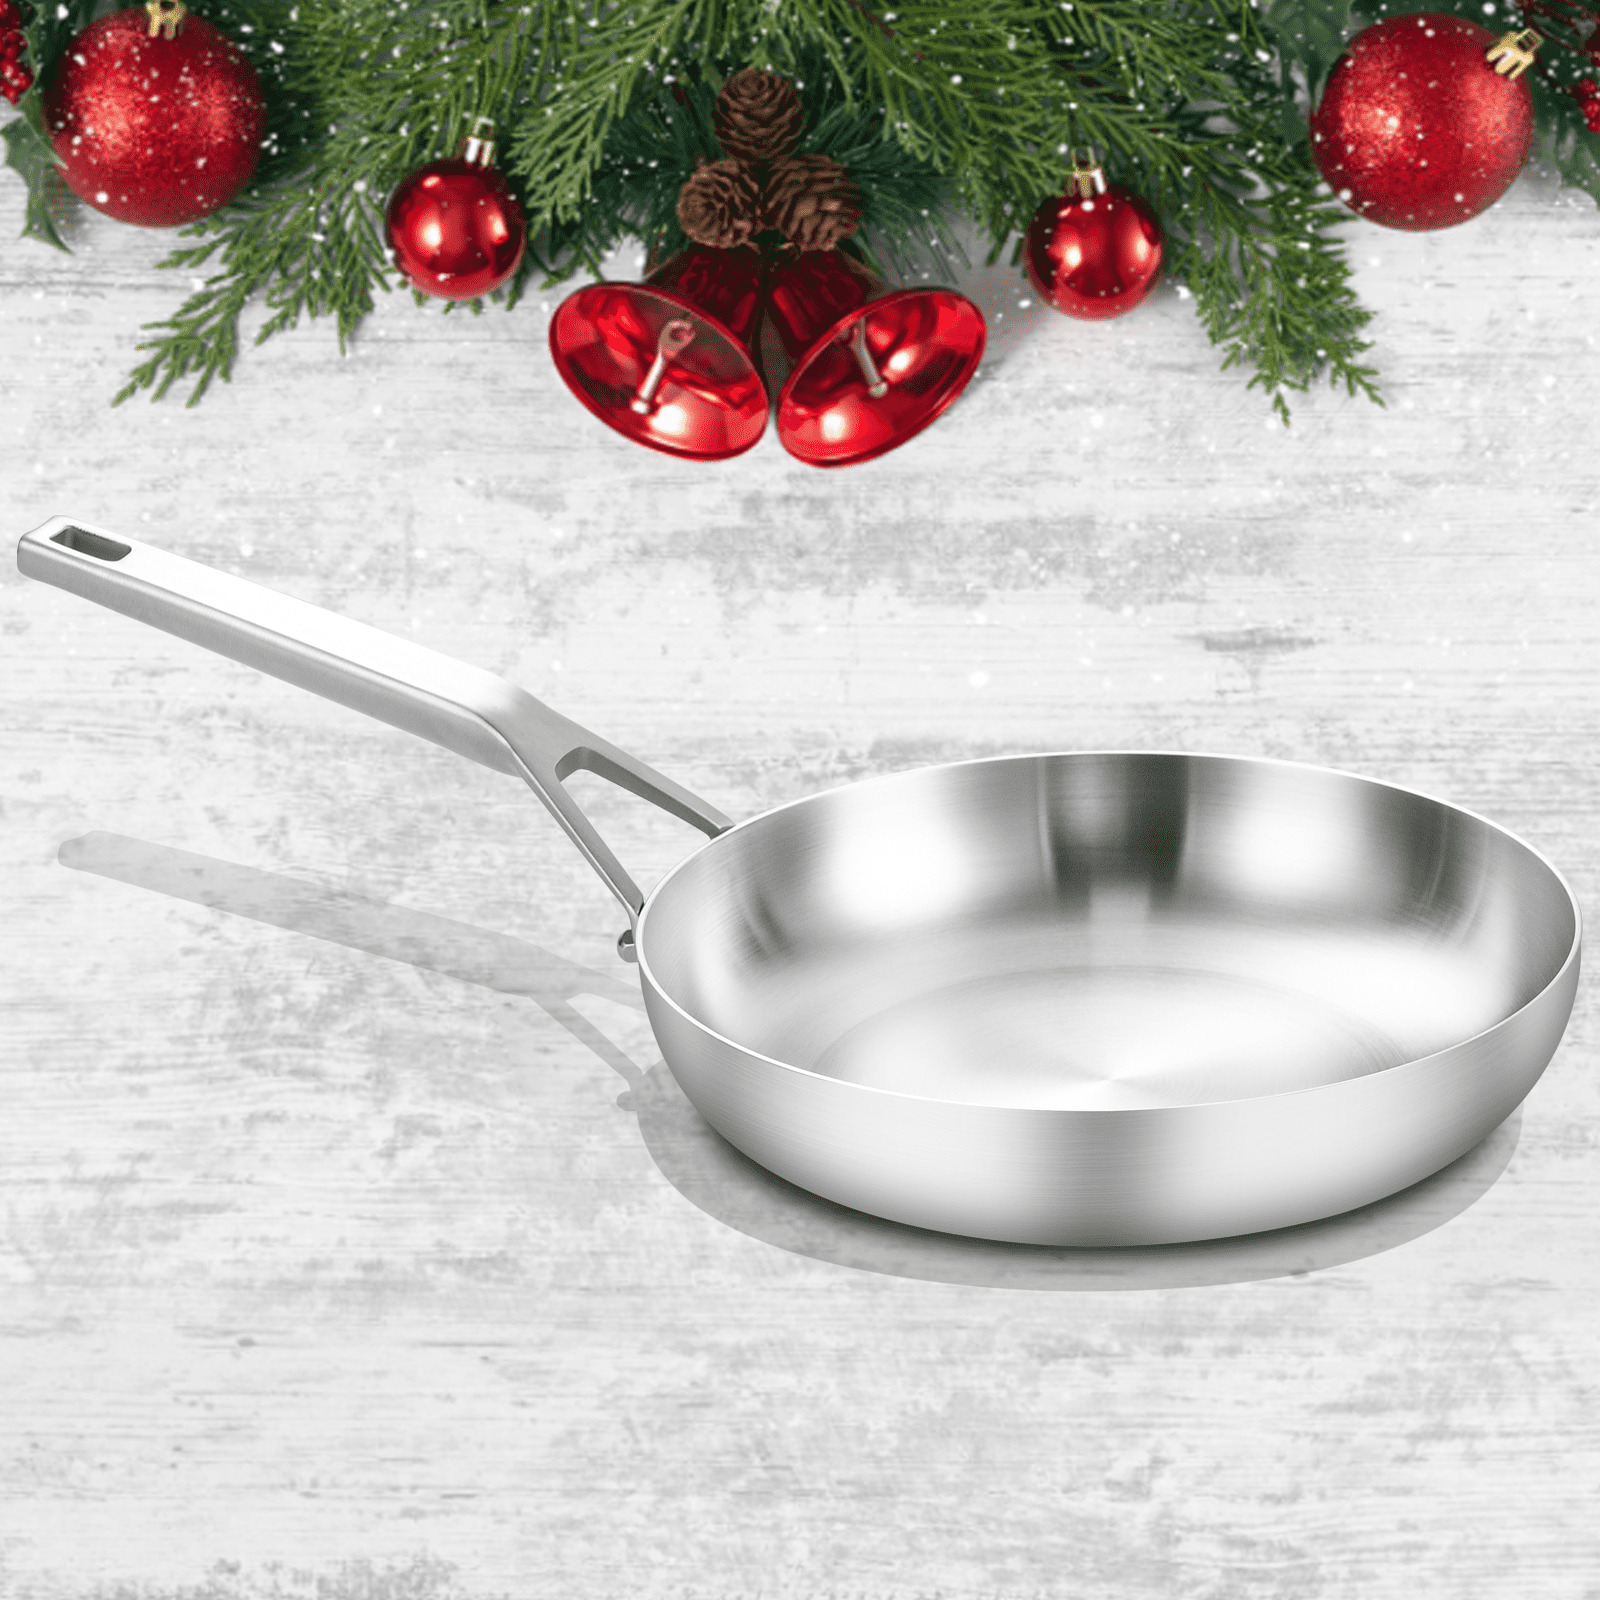 Phantom Chef 8” and 11 Frying Pan Set | Pure Aluminum Nonstick Frying Pan  Set With Easy Clean Ceramic Coating | Soft Touch Stay Cool Handle | PTFE